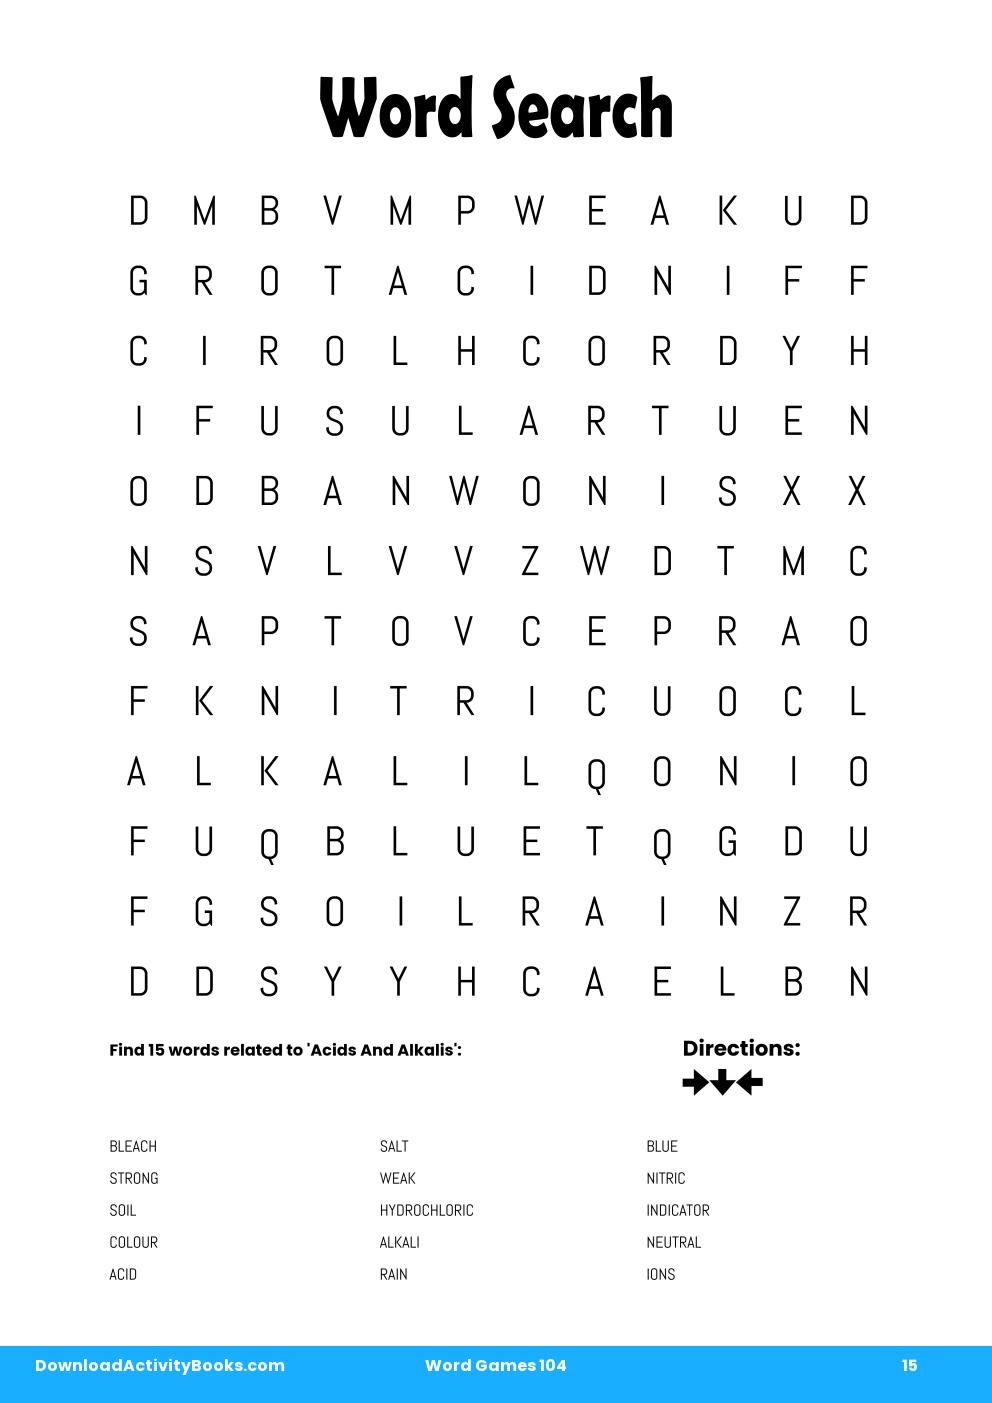 Word Search in Word Games 104